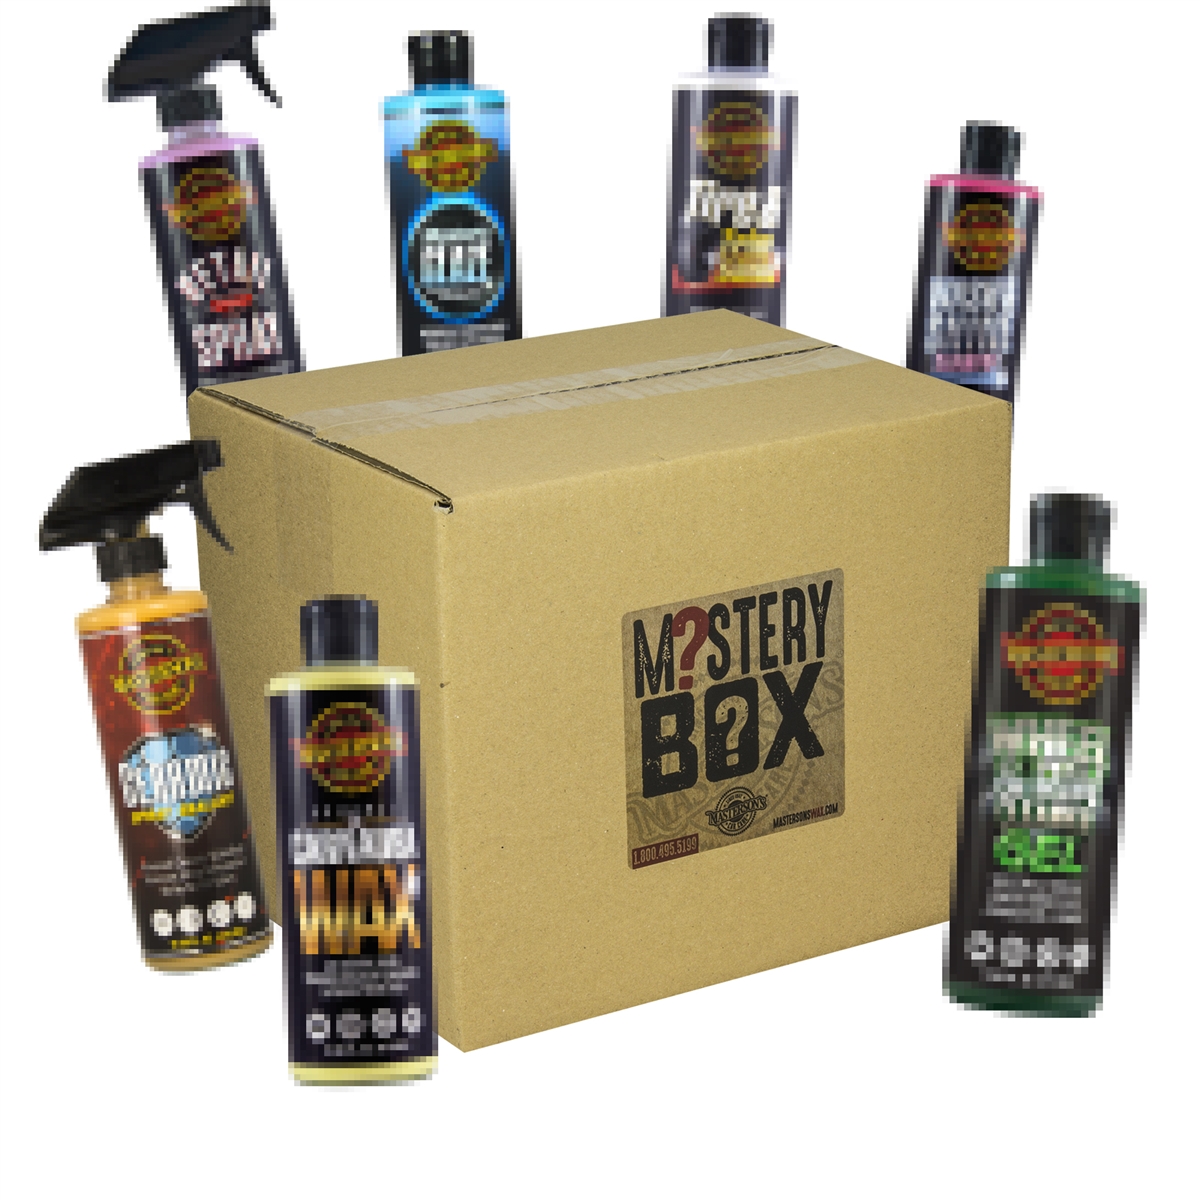 MYSTERY BOX - $49.99 LIMITED EDITION - $80+ VALUE!